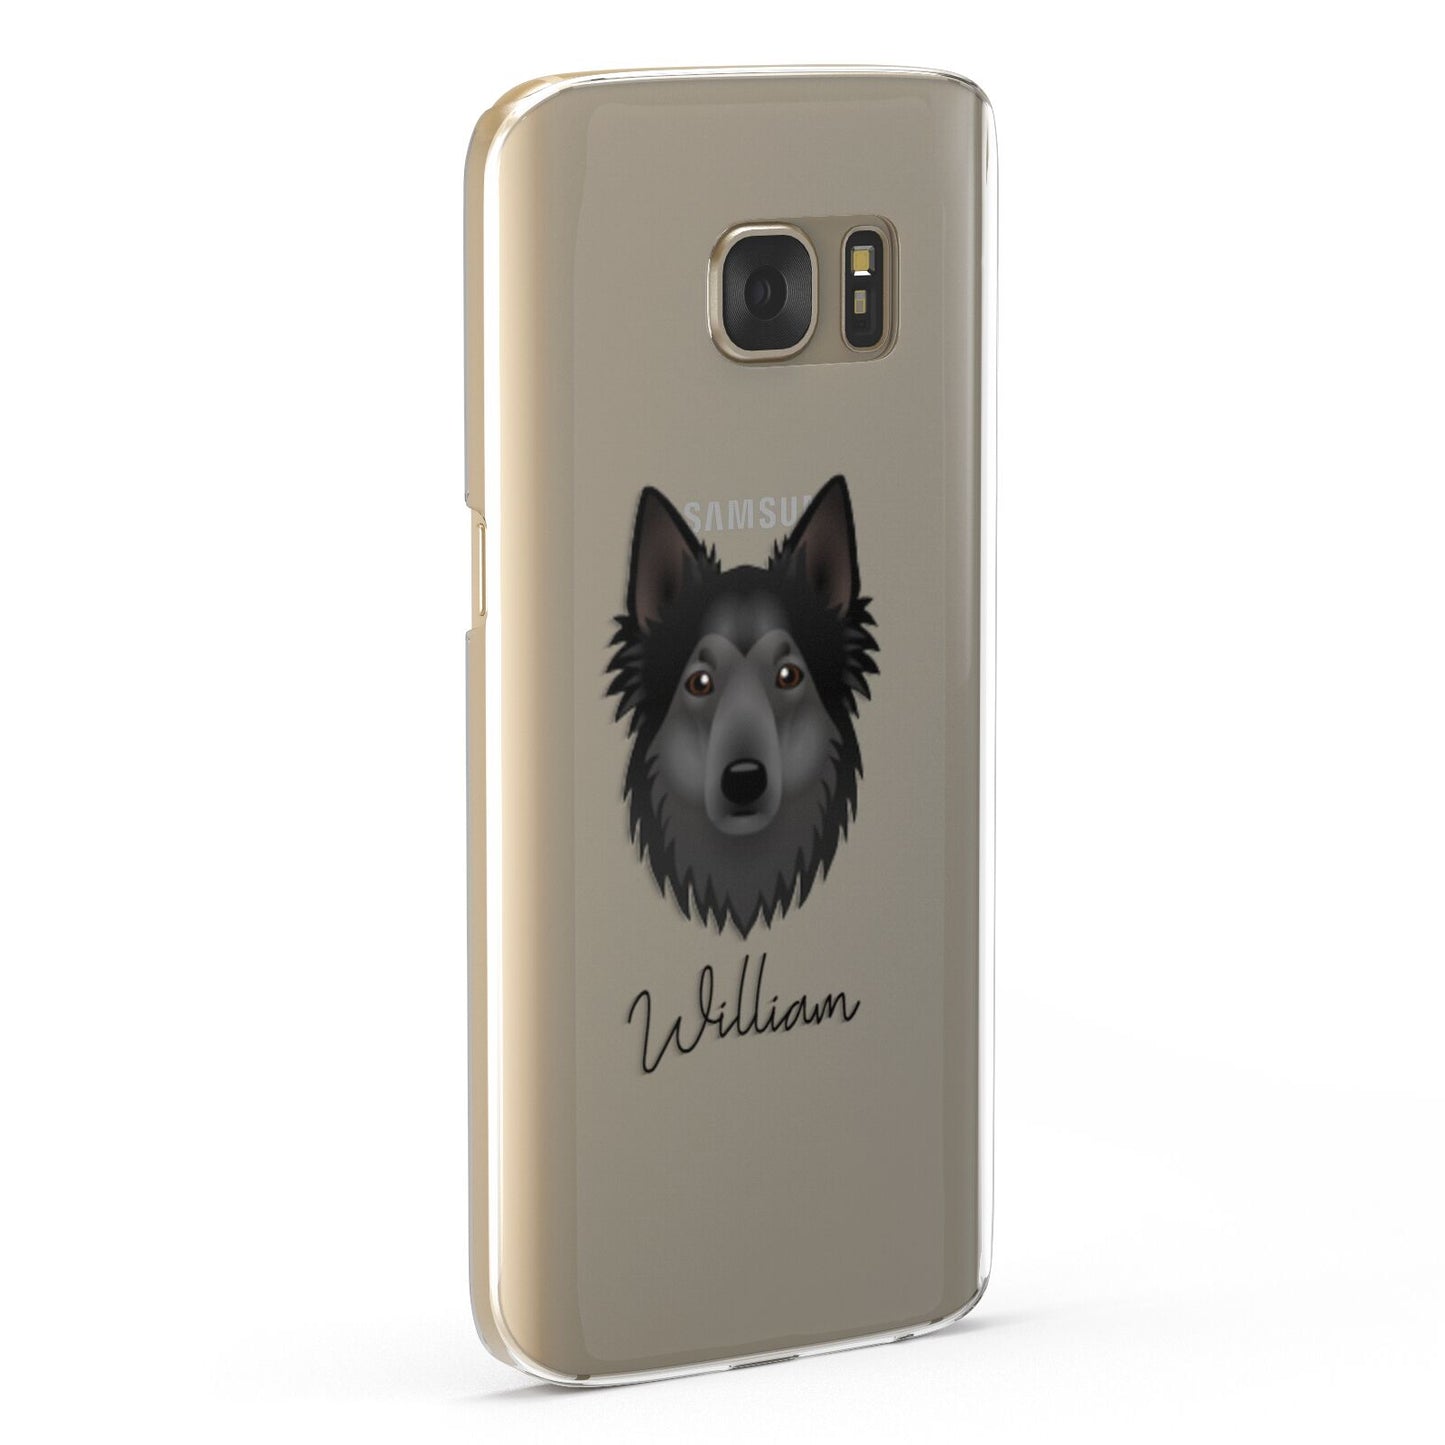 Shollie Personalised Samsung Galaxy Case Fourty Five Degrees